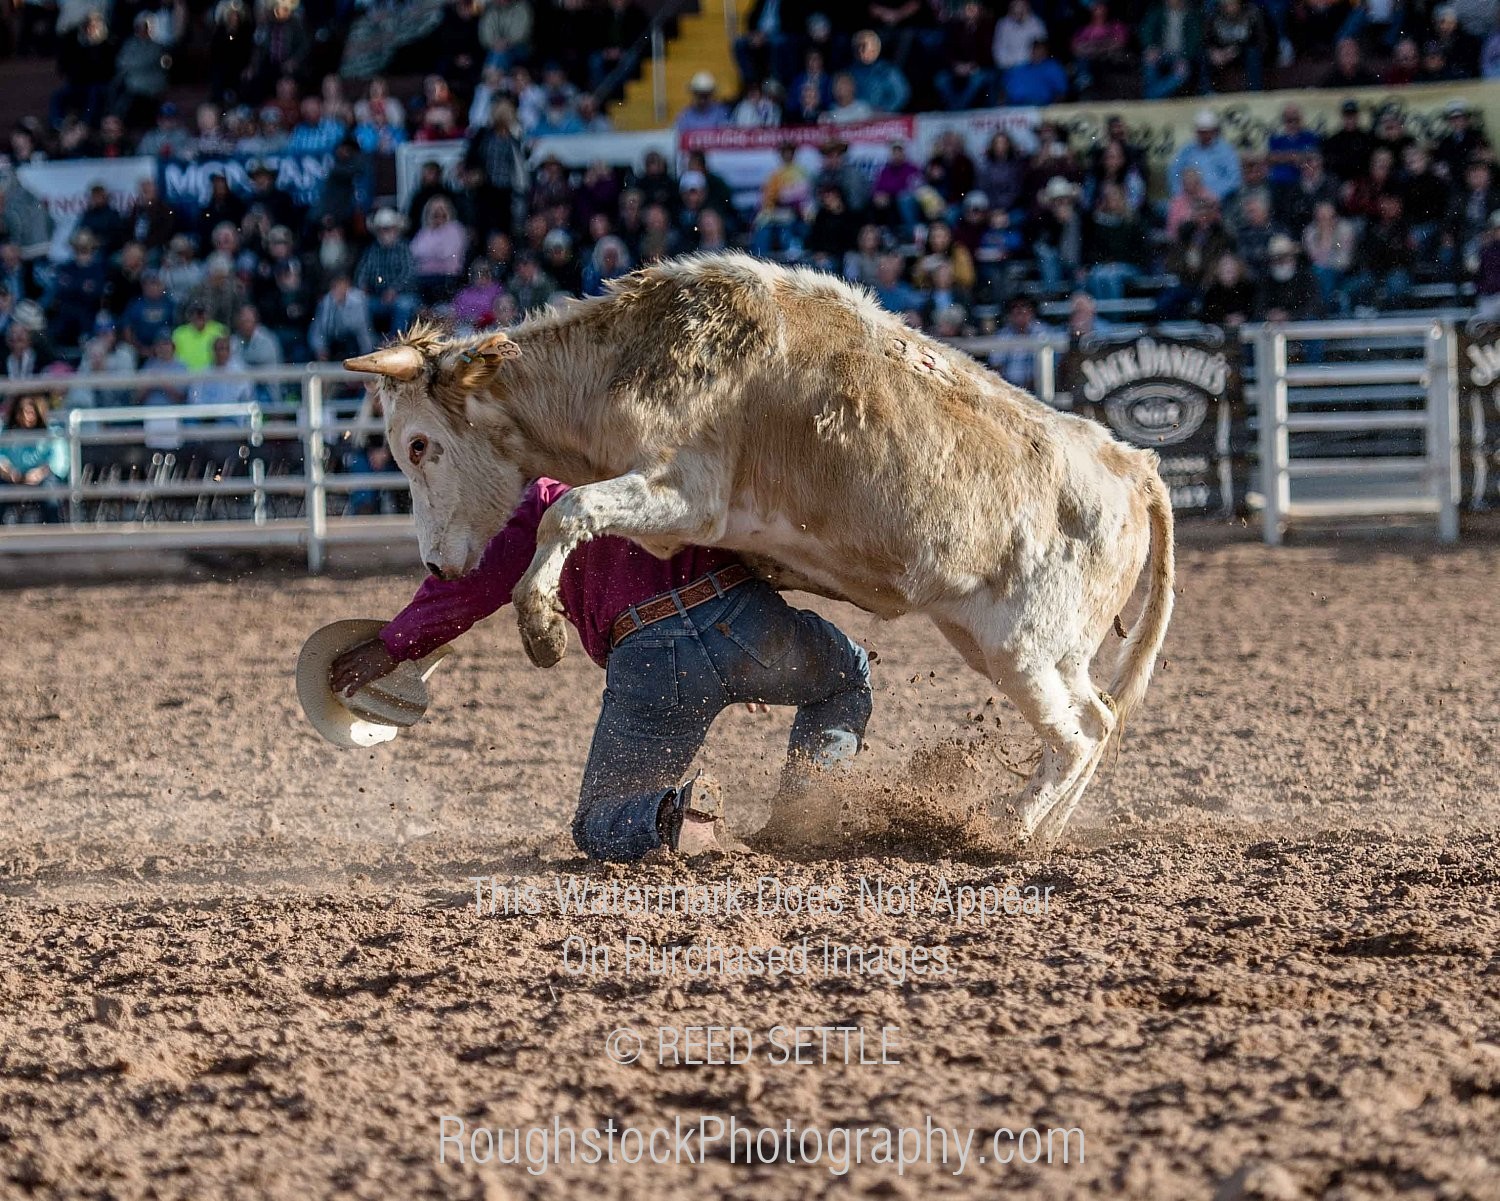 Steer Wrestling Rodeo/Event 2019 Yuma Silver Spur PRCA Rodeo